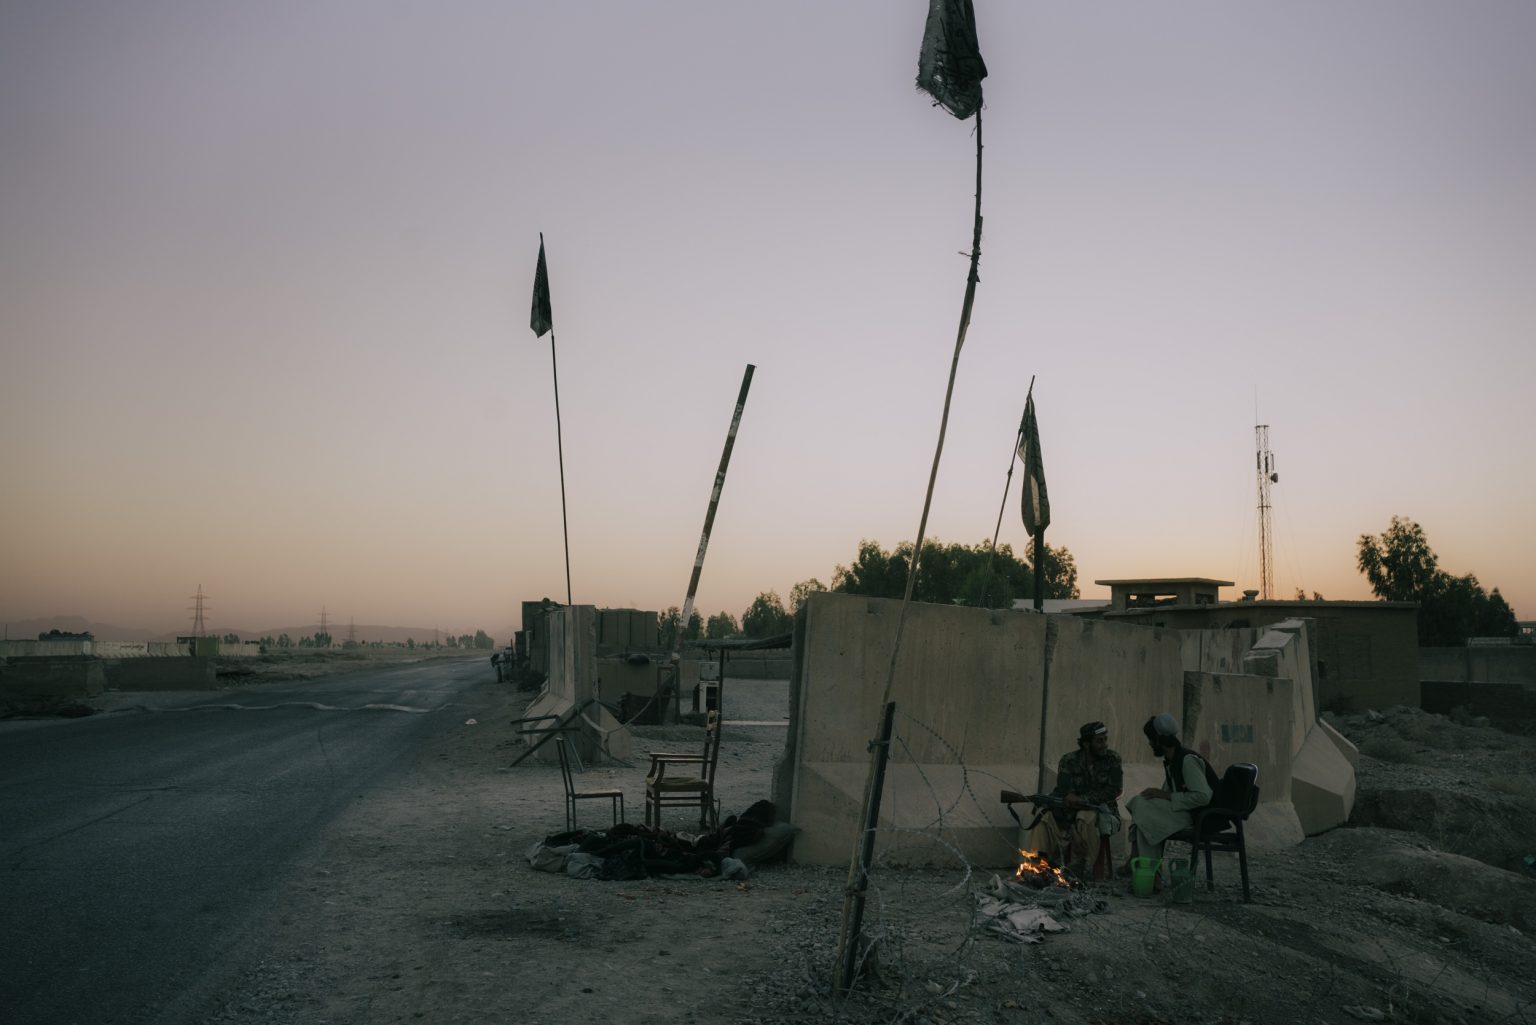 KANDAHAR, AFGHANISTAN - OCTOBER 20:
Taliban fighters warm themselves in front of a small bonfire at a checkpoint outside the city of Kandahar. They sit behind blast walls to prevent the chill wind from blowing into their bodies.
(Photo by Lorenzo Tugnoli/ The Washington Post)